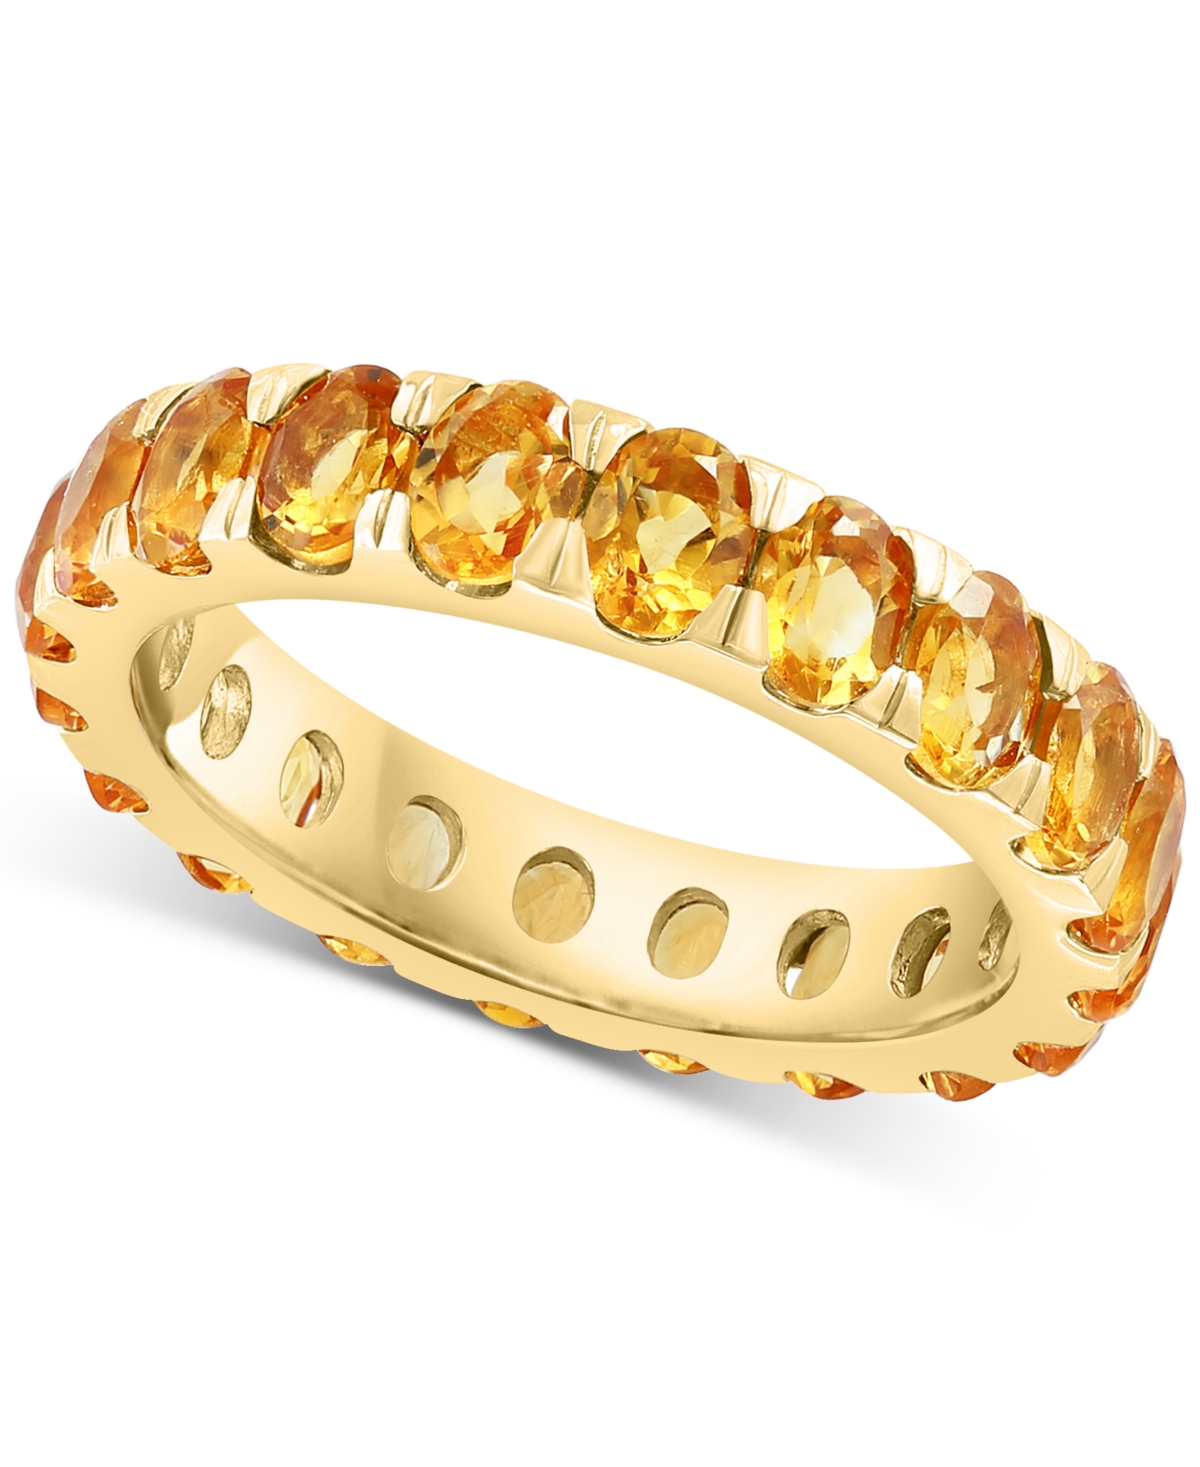 Effy Citrine Oval Eternity Band (3-1/4 ct. t.w) in 14k Gold - Yellow Gold